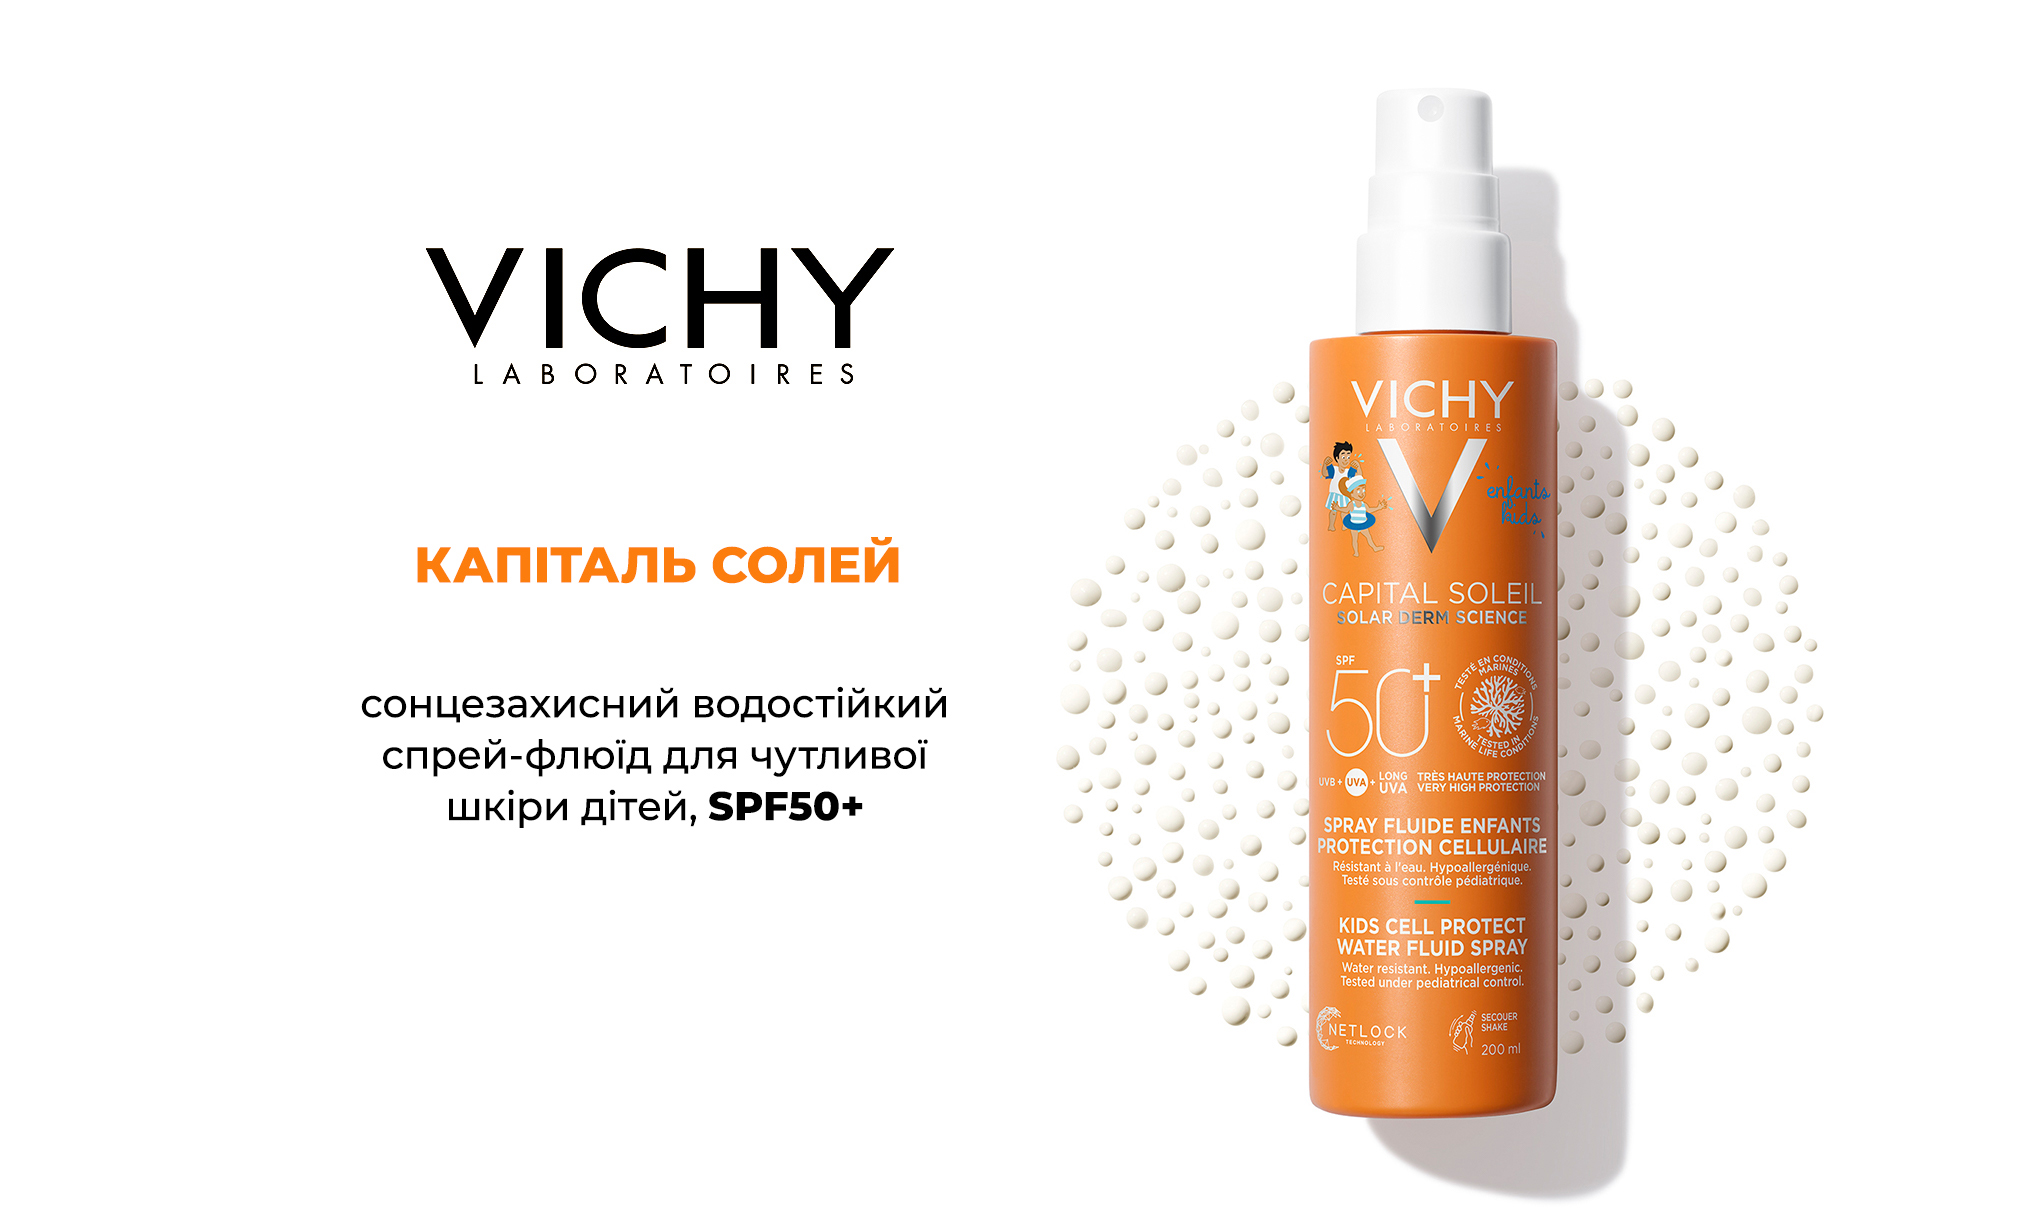 Vichy Capital Soleil Kids Cell Protect Water Fluid Spray